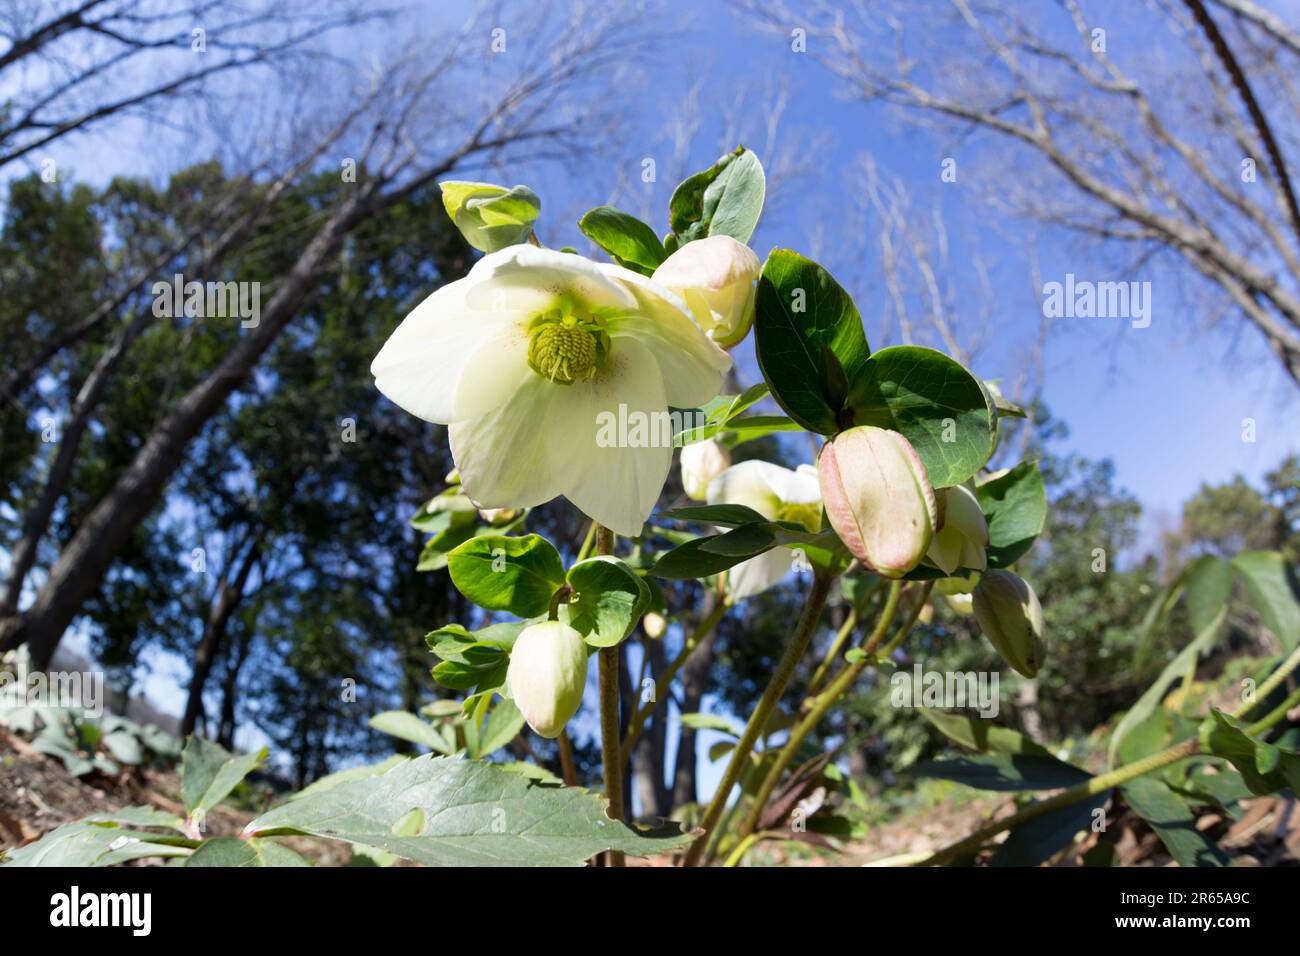 The flower of Christmas rose Stock Photo